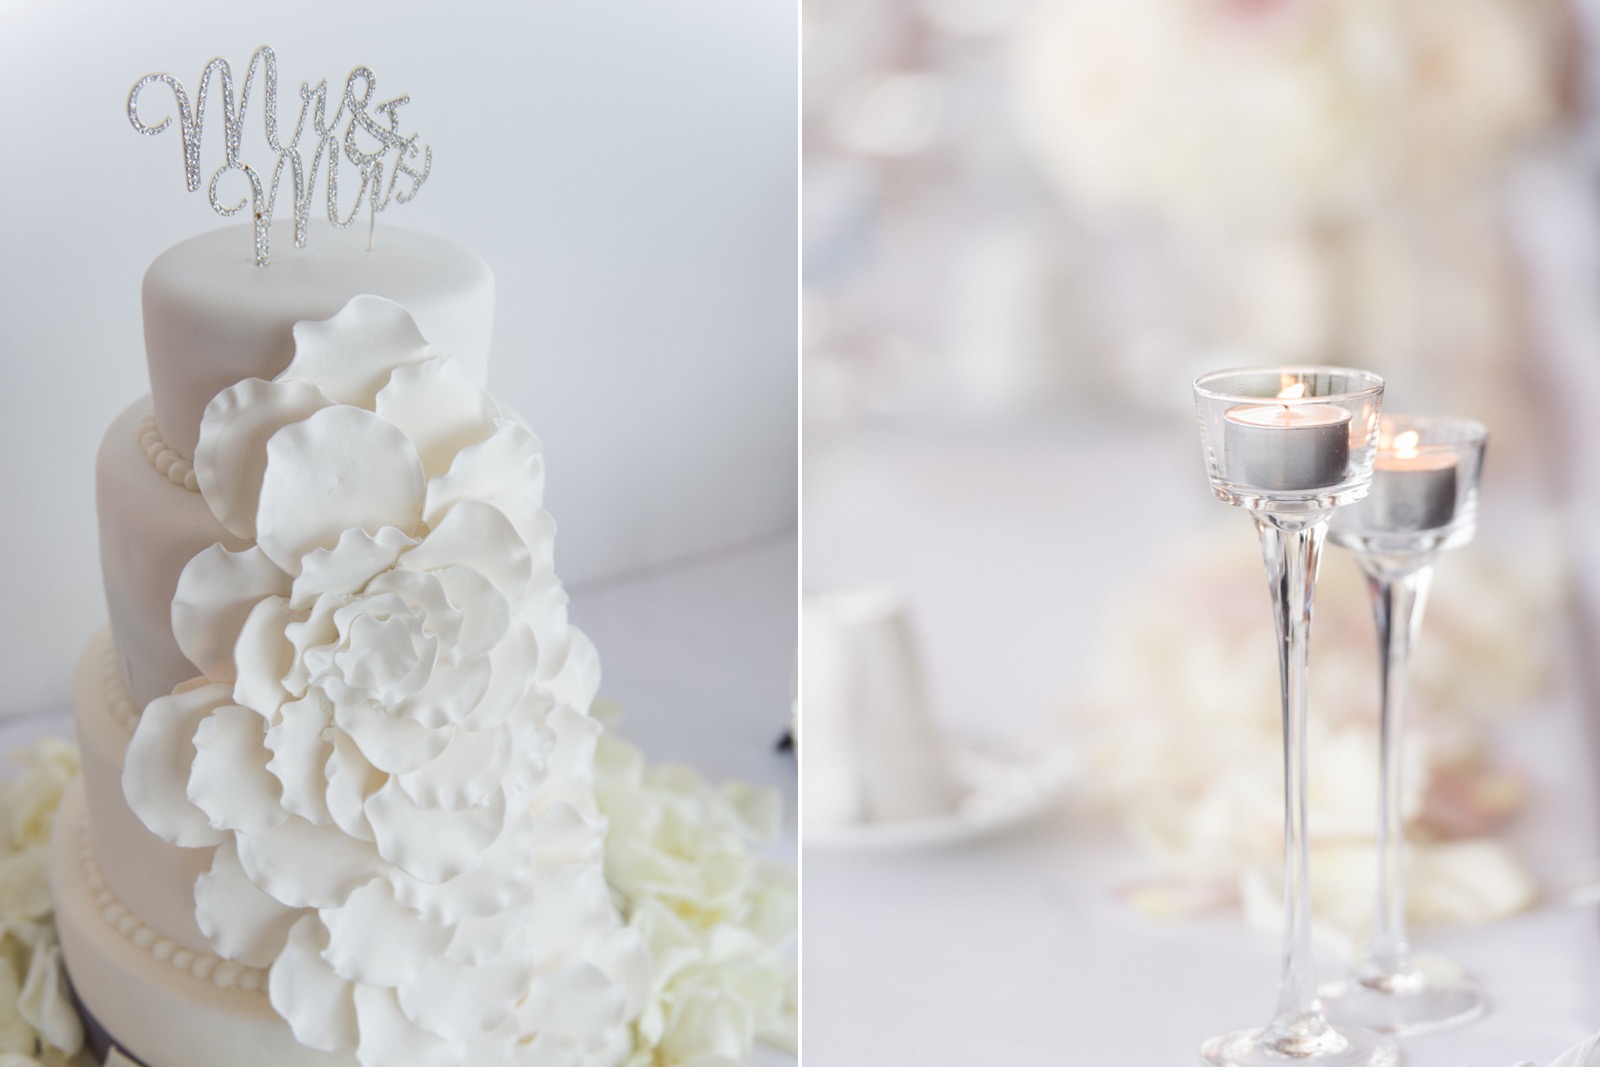 Wedding cake and candles